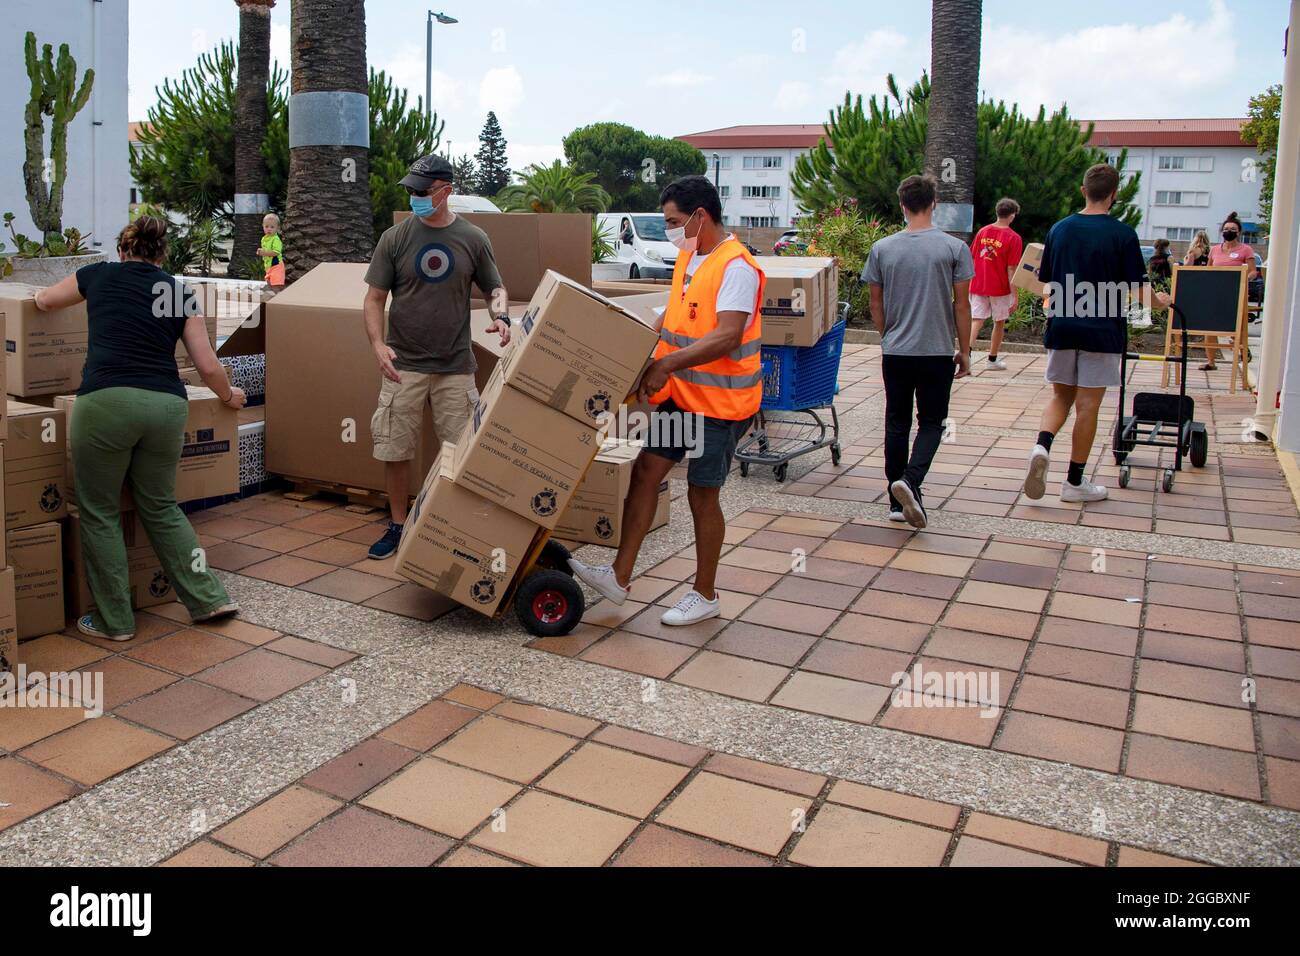 Rota, Spain. 29th Aug, 2021. Volunteers move boxed donations for Operations Allies Refuge to support Afghan refugees evacuated from Kabul August 29, 2021 in Rota, Spain. NAS Rota is providing temporary lodging for evacuees from Afghanistan as part of Operation Allies Refuge. Credit: Planetpix/Alamy Live News Stock Photo